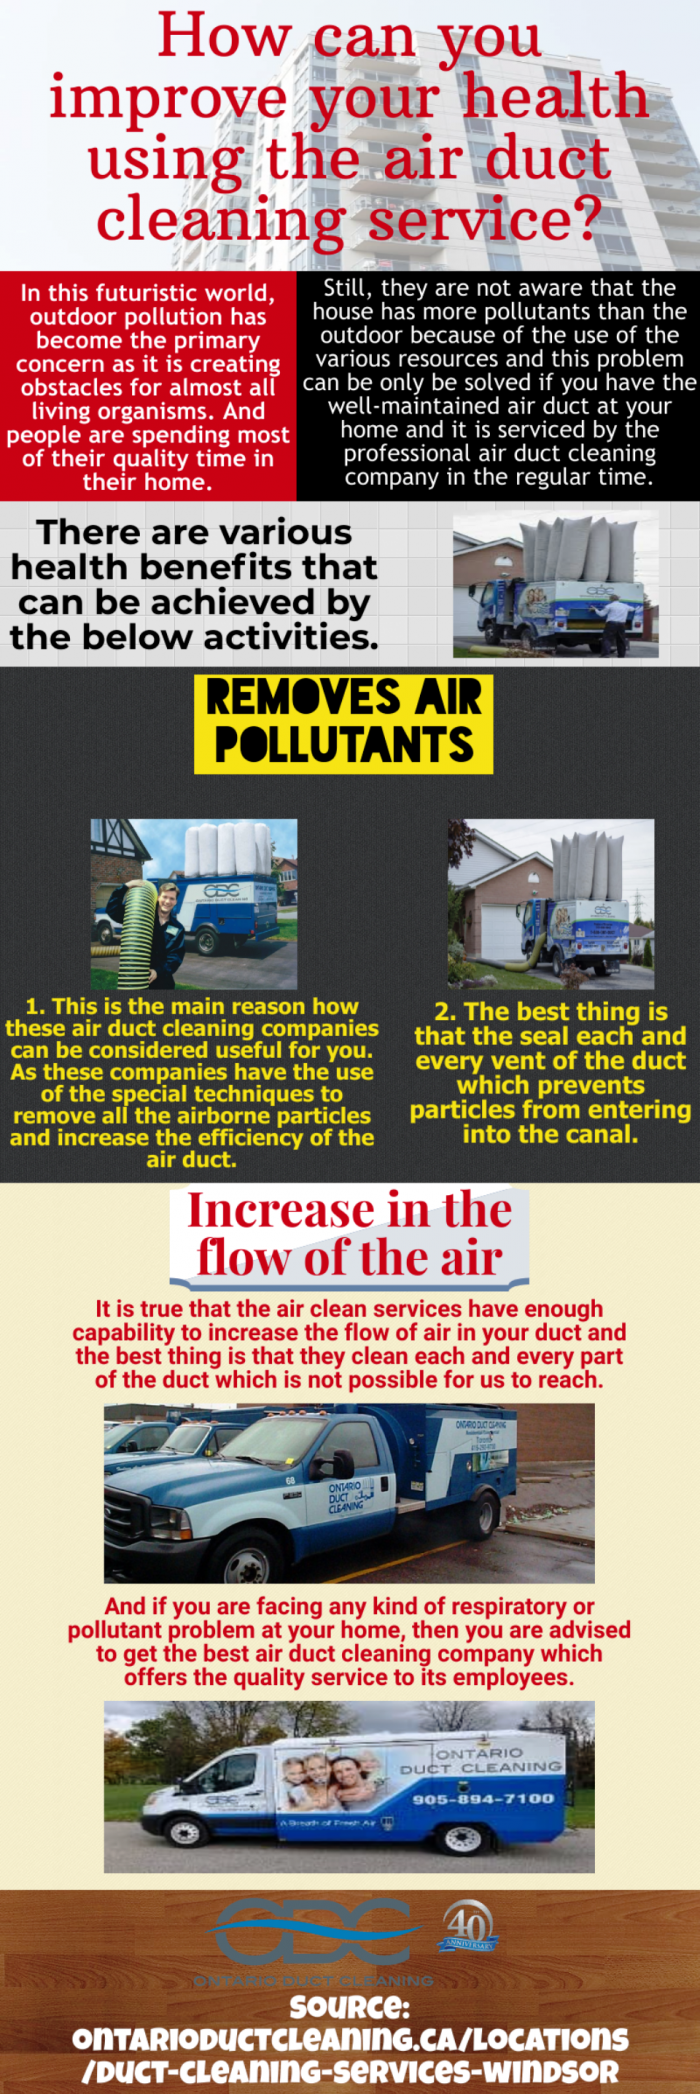 Important Information About air duct cleaning